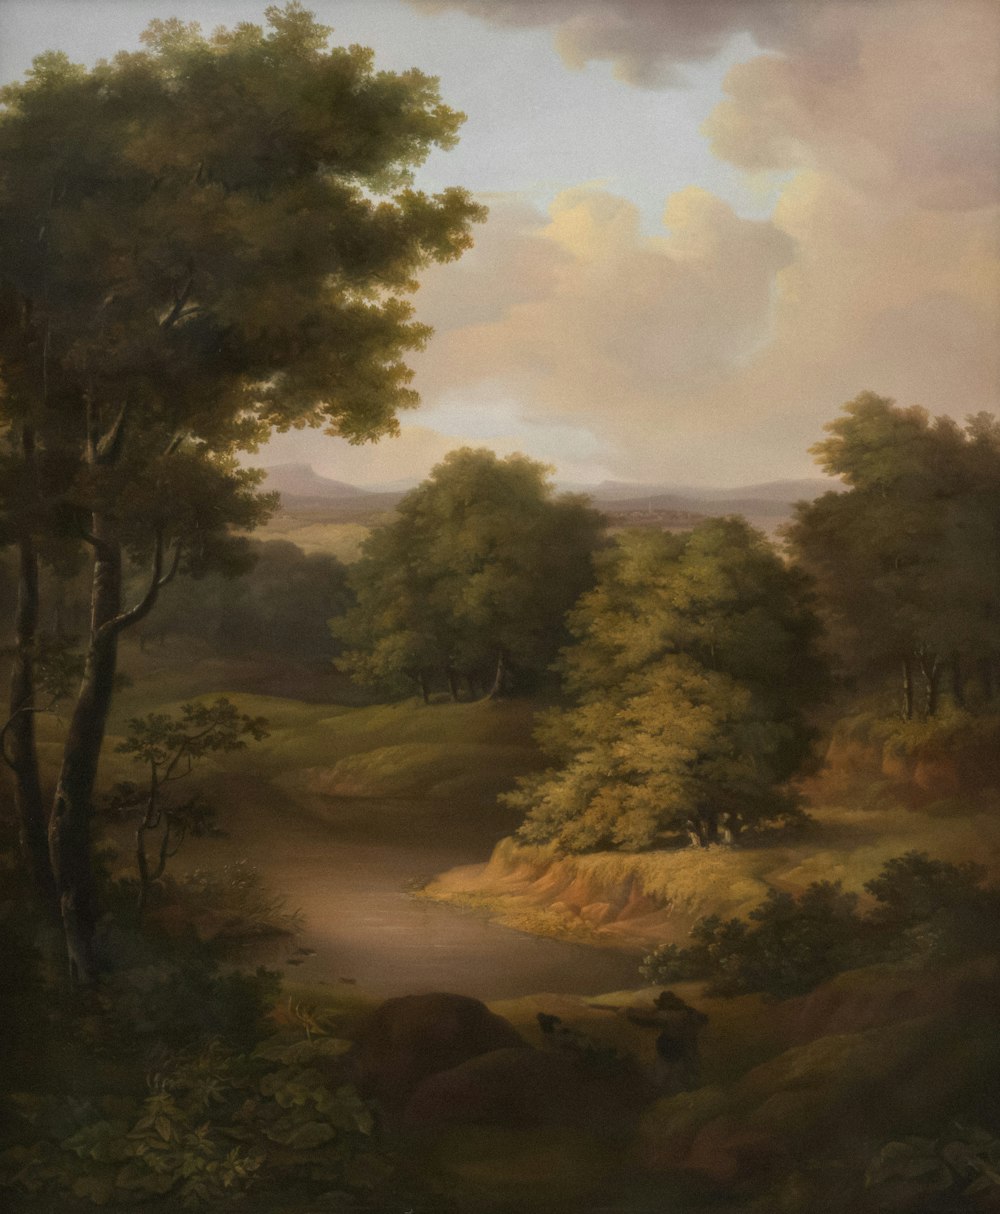 a painting of a wooded area with animals